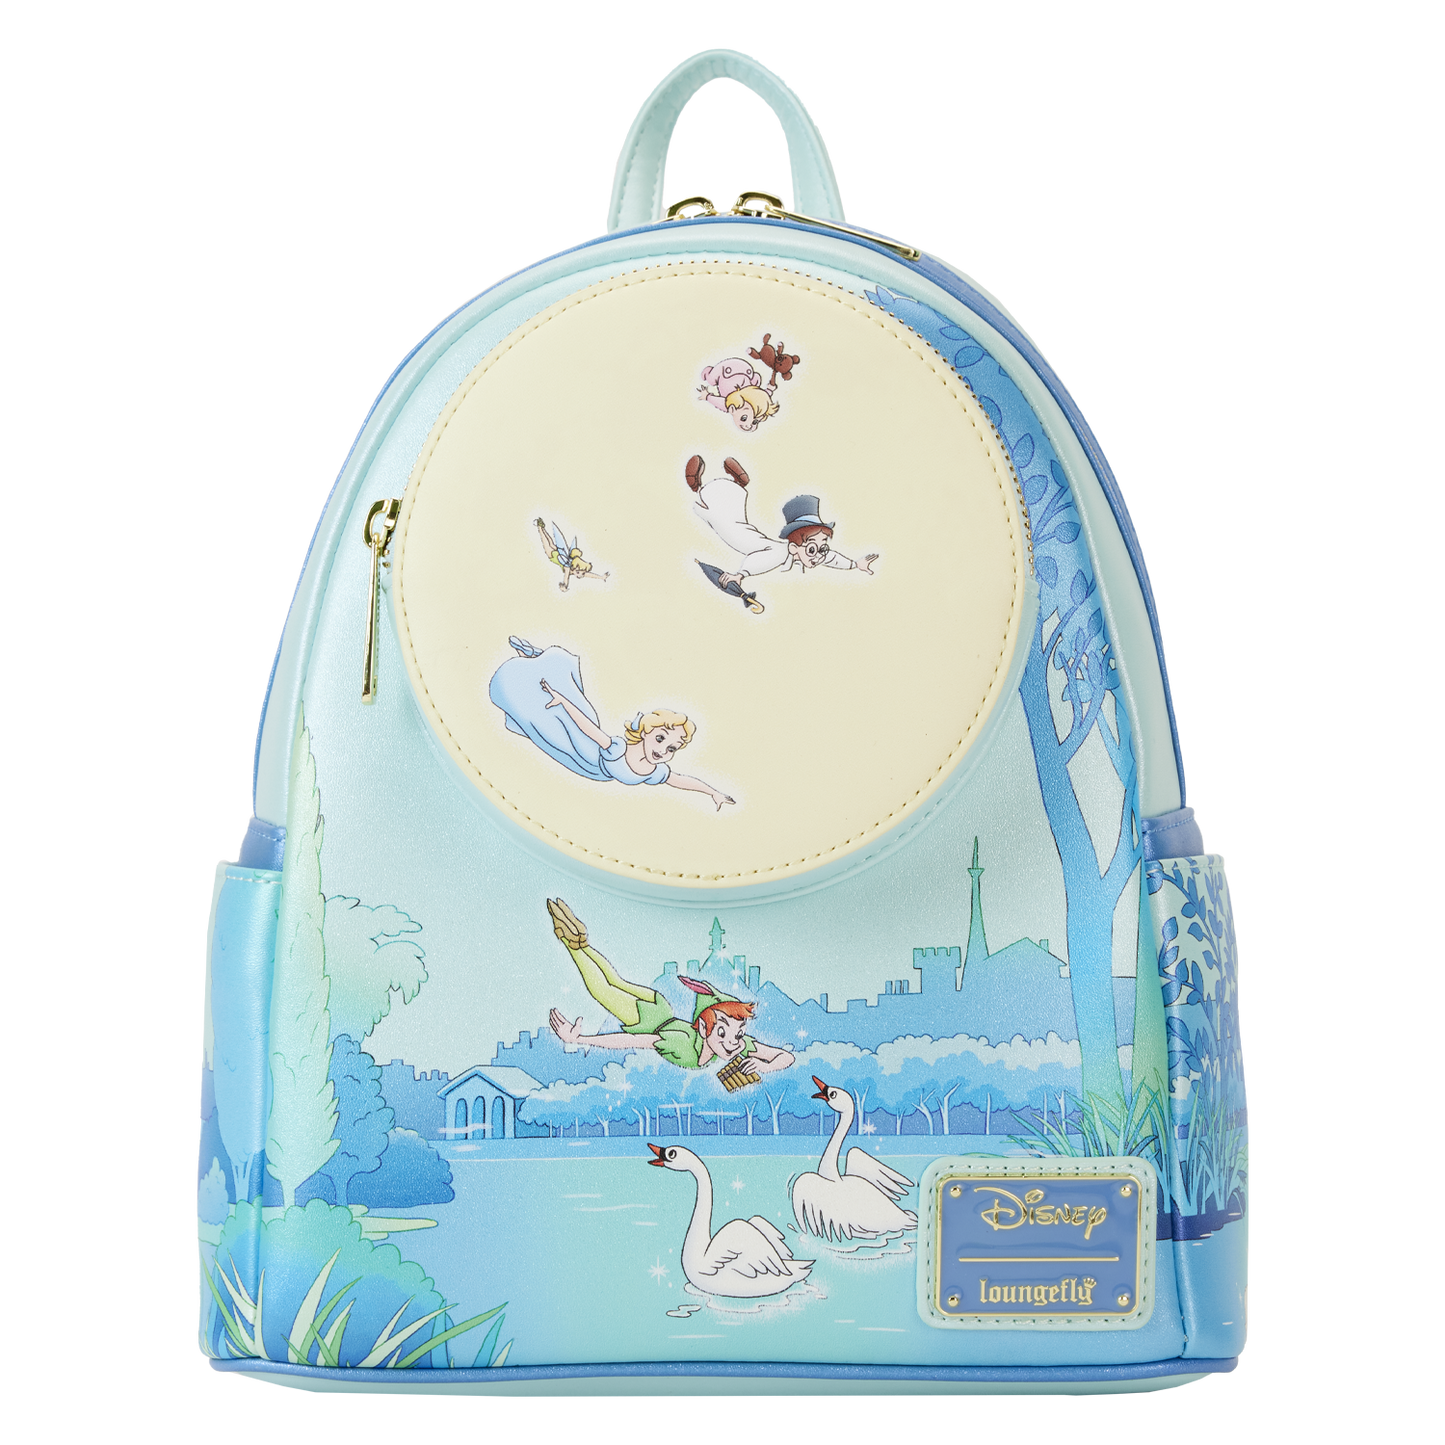 Peter Pan You Can Fly Glow Mini Backpack